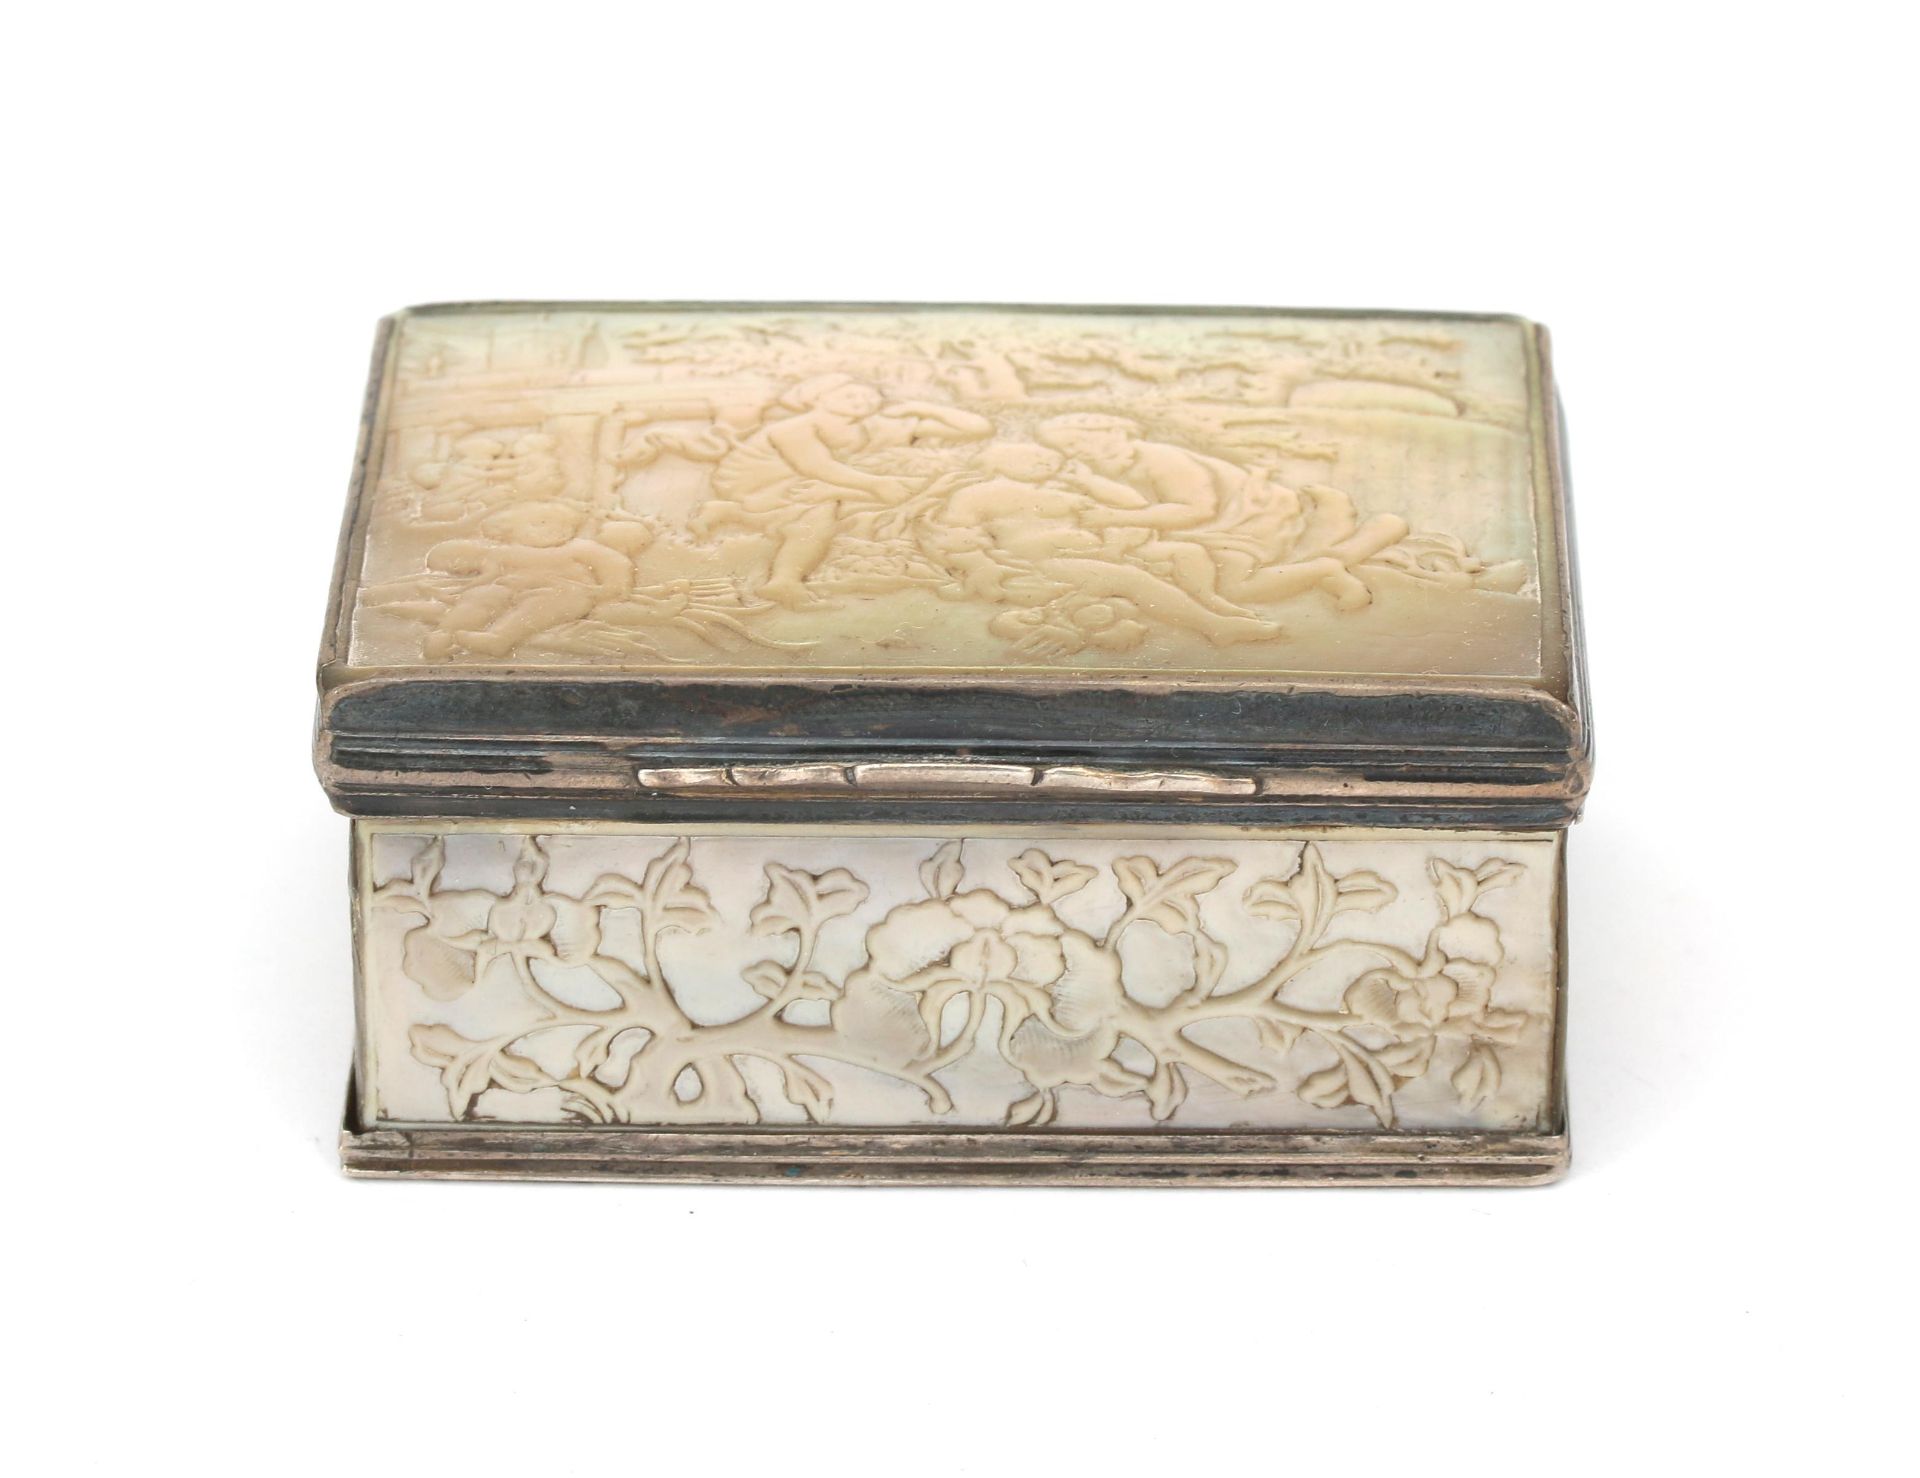 A mother of pearl snuff box with 835 silver mount. On the lid a carved relief of an allegorical